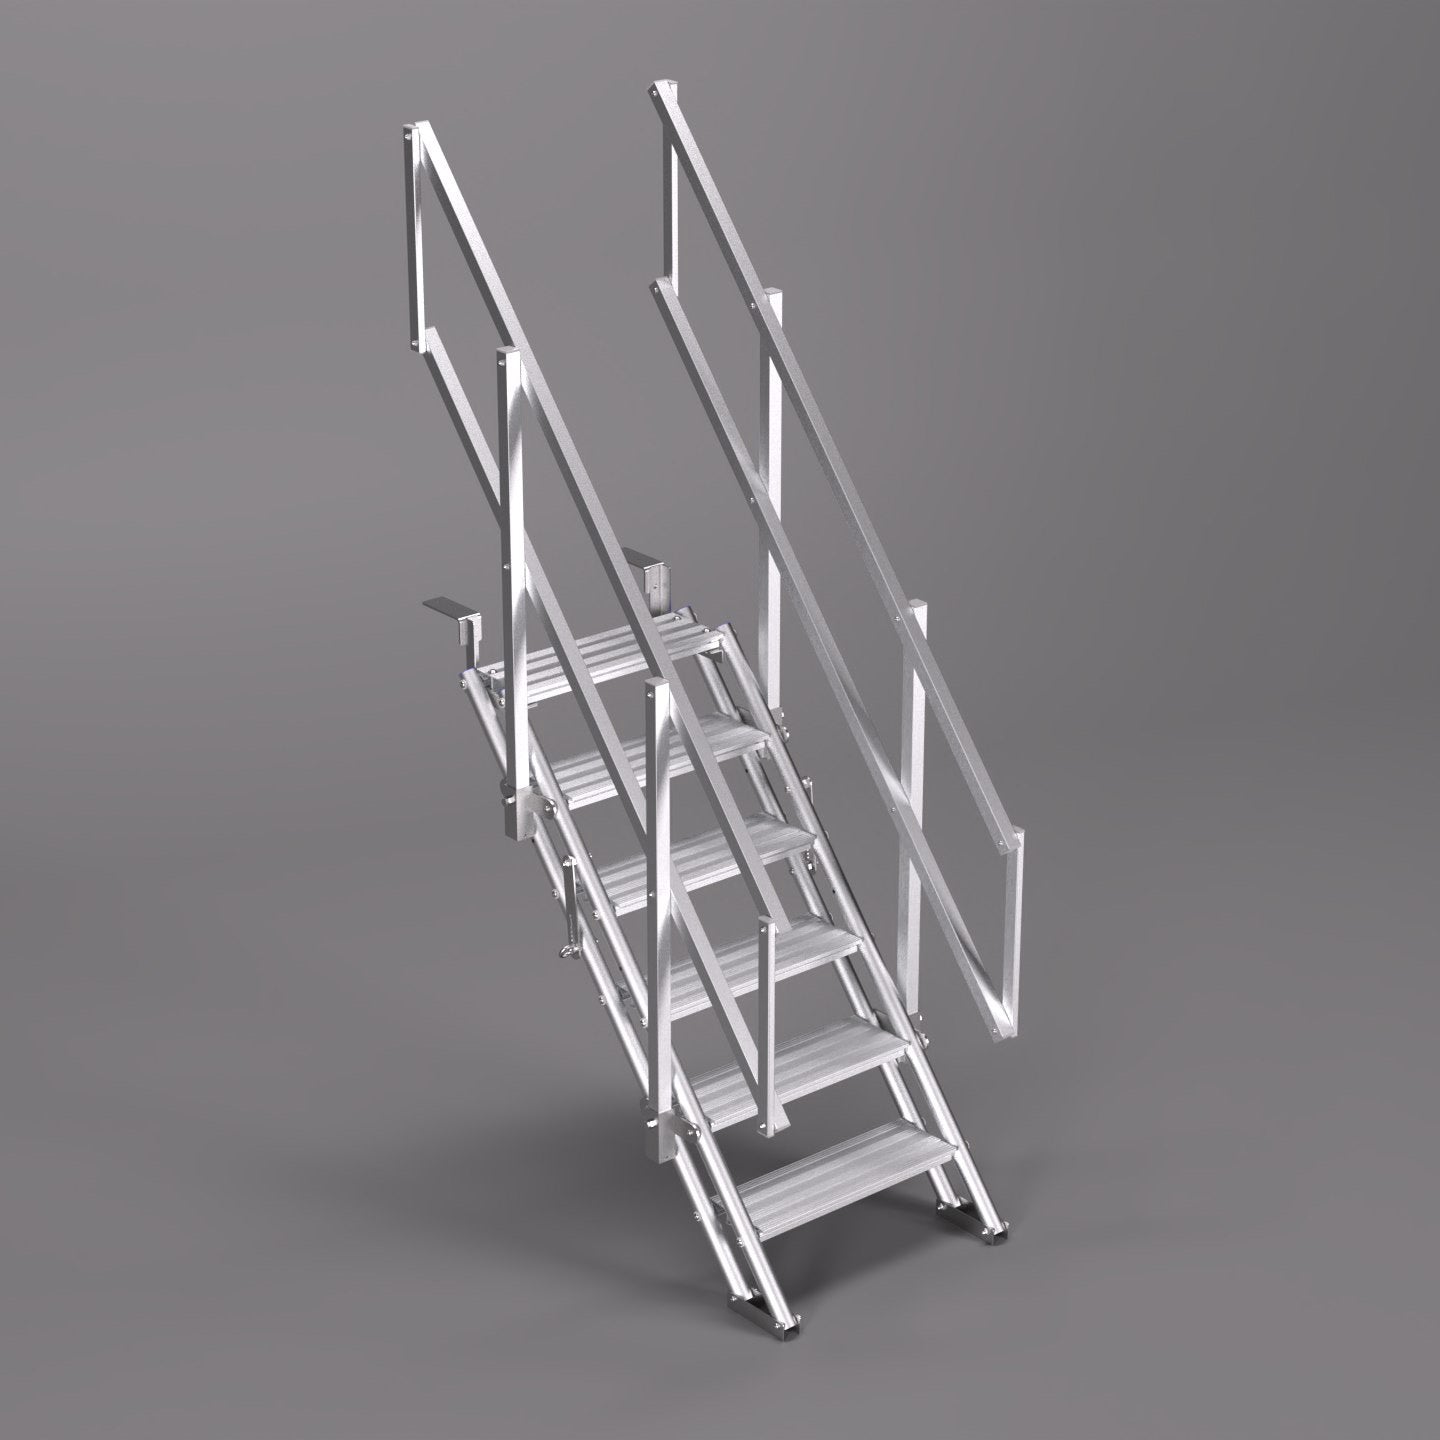 An image of a 1.5m ALTO Universal Stair Set with the flat slab fixing option.